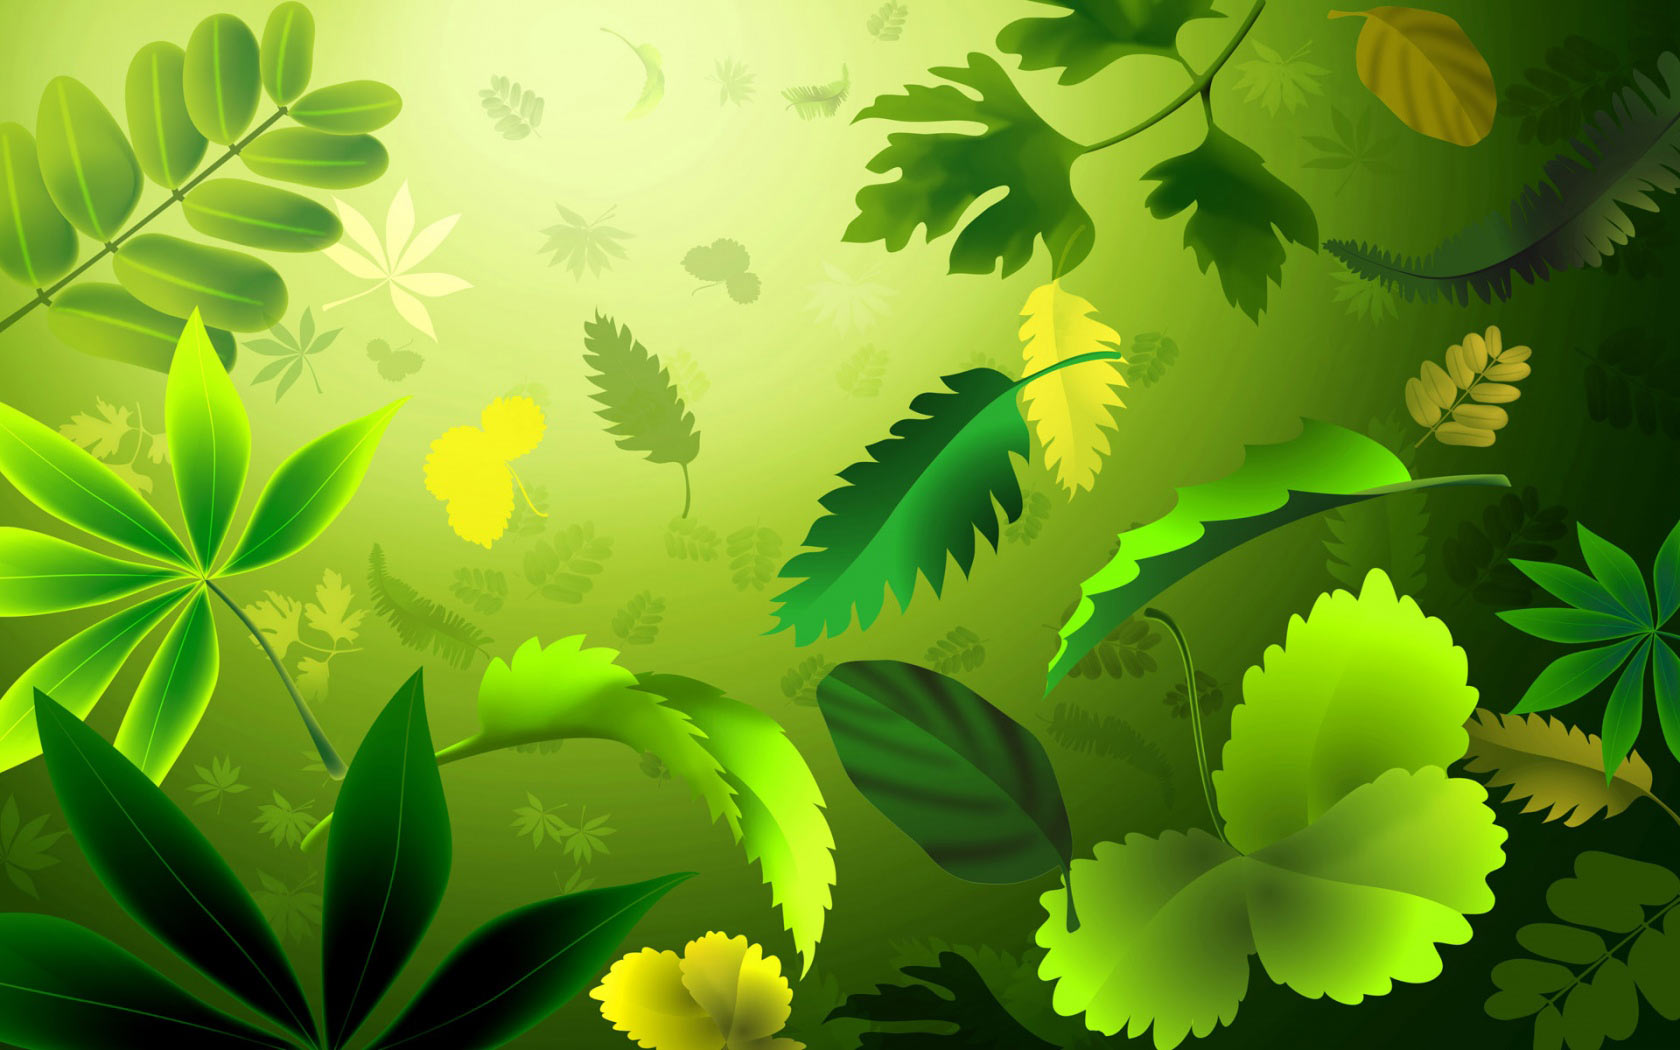 Free HD computer background nature leaves - Tech Grapple